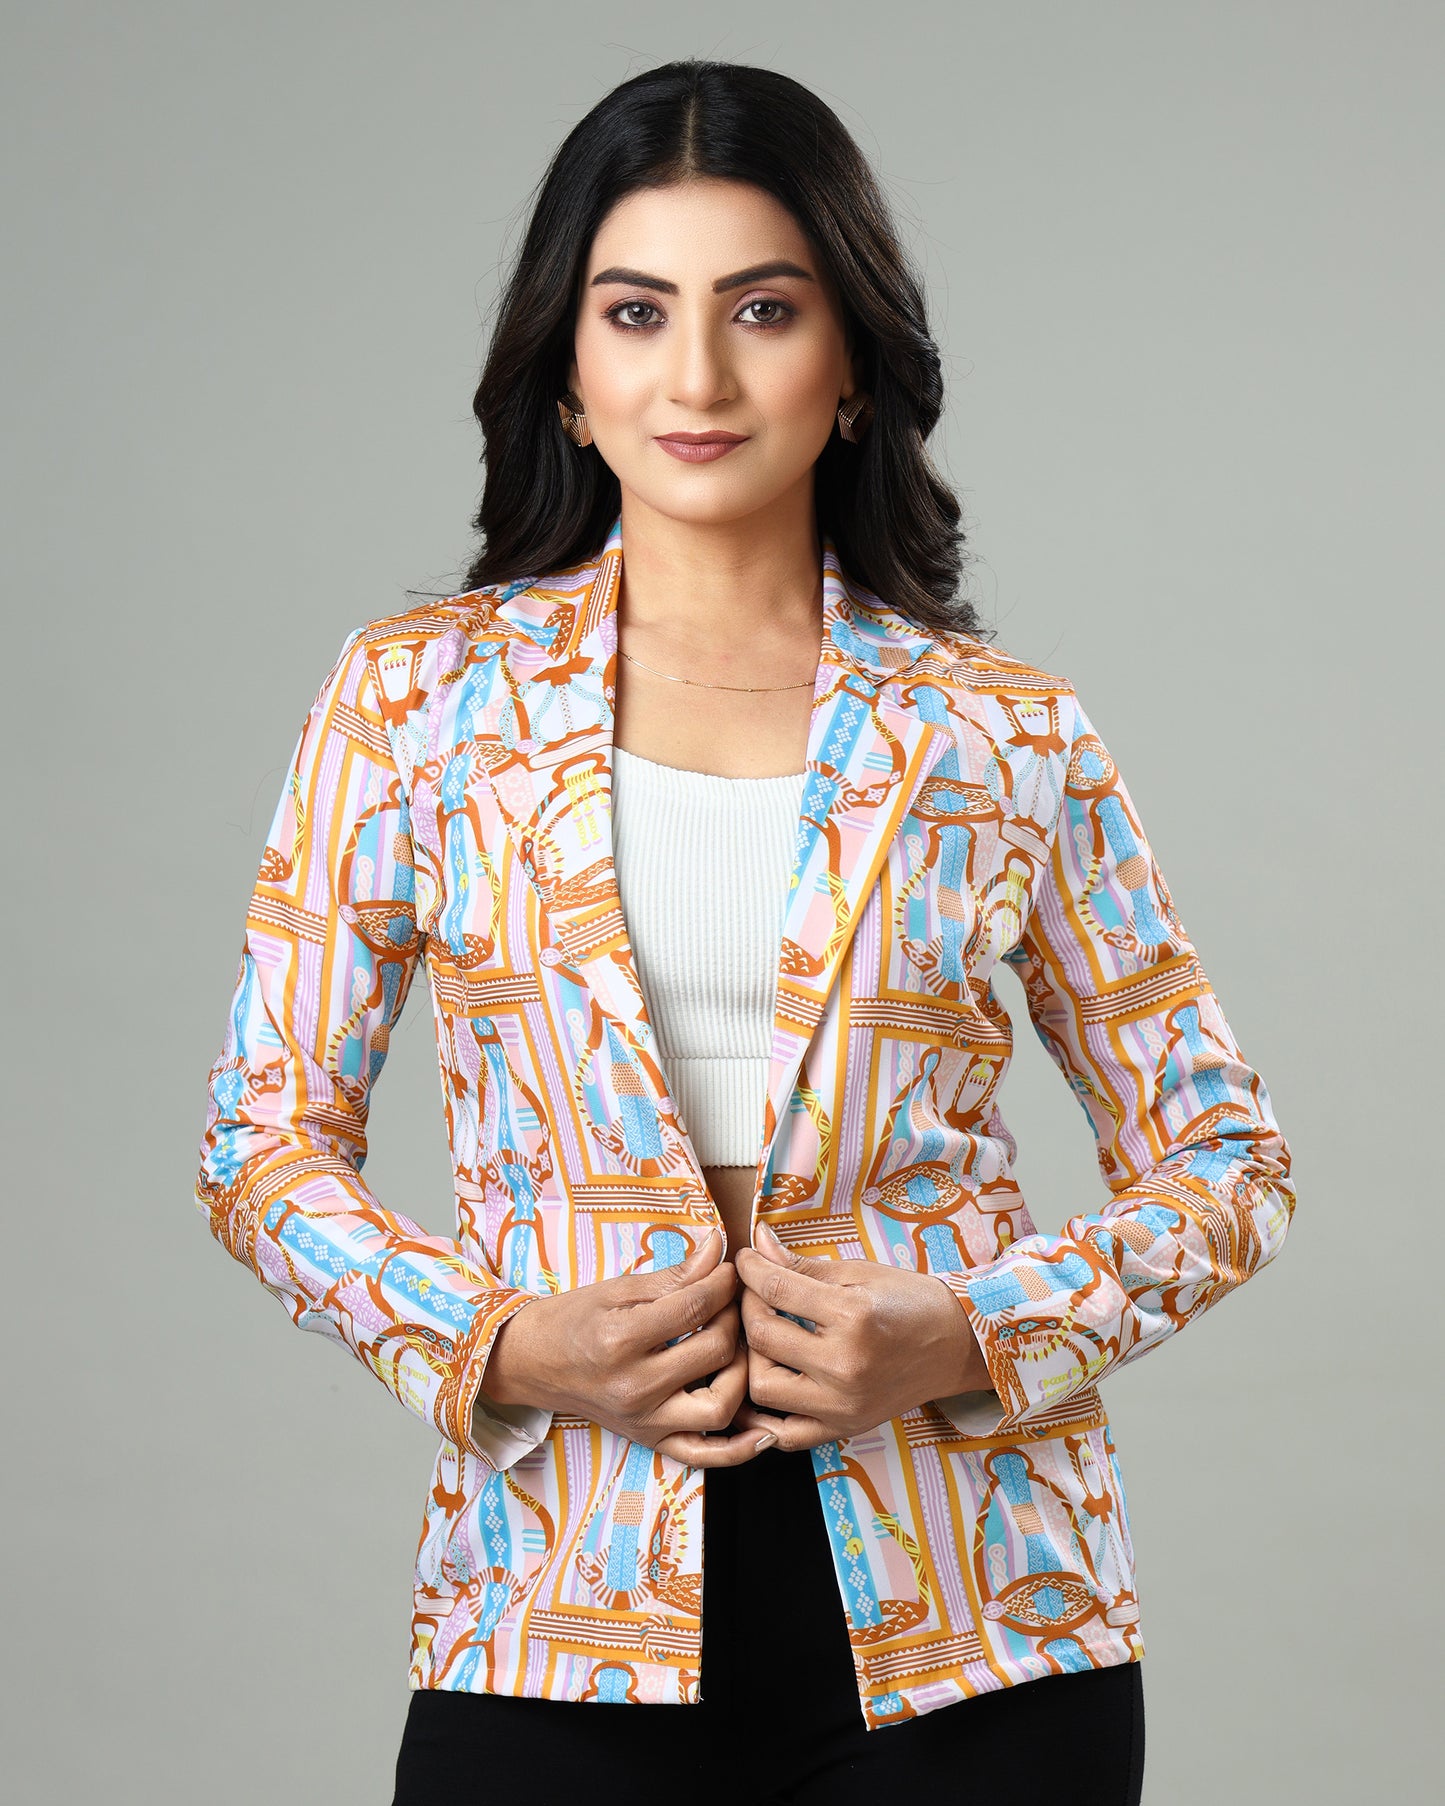 Turn Heads in Style: Women's Attractive Jacket